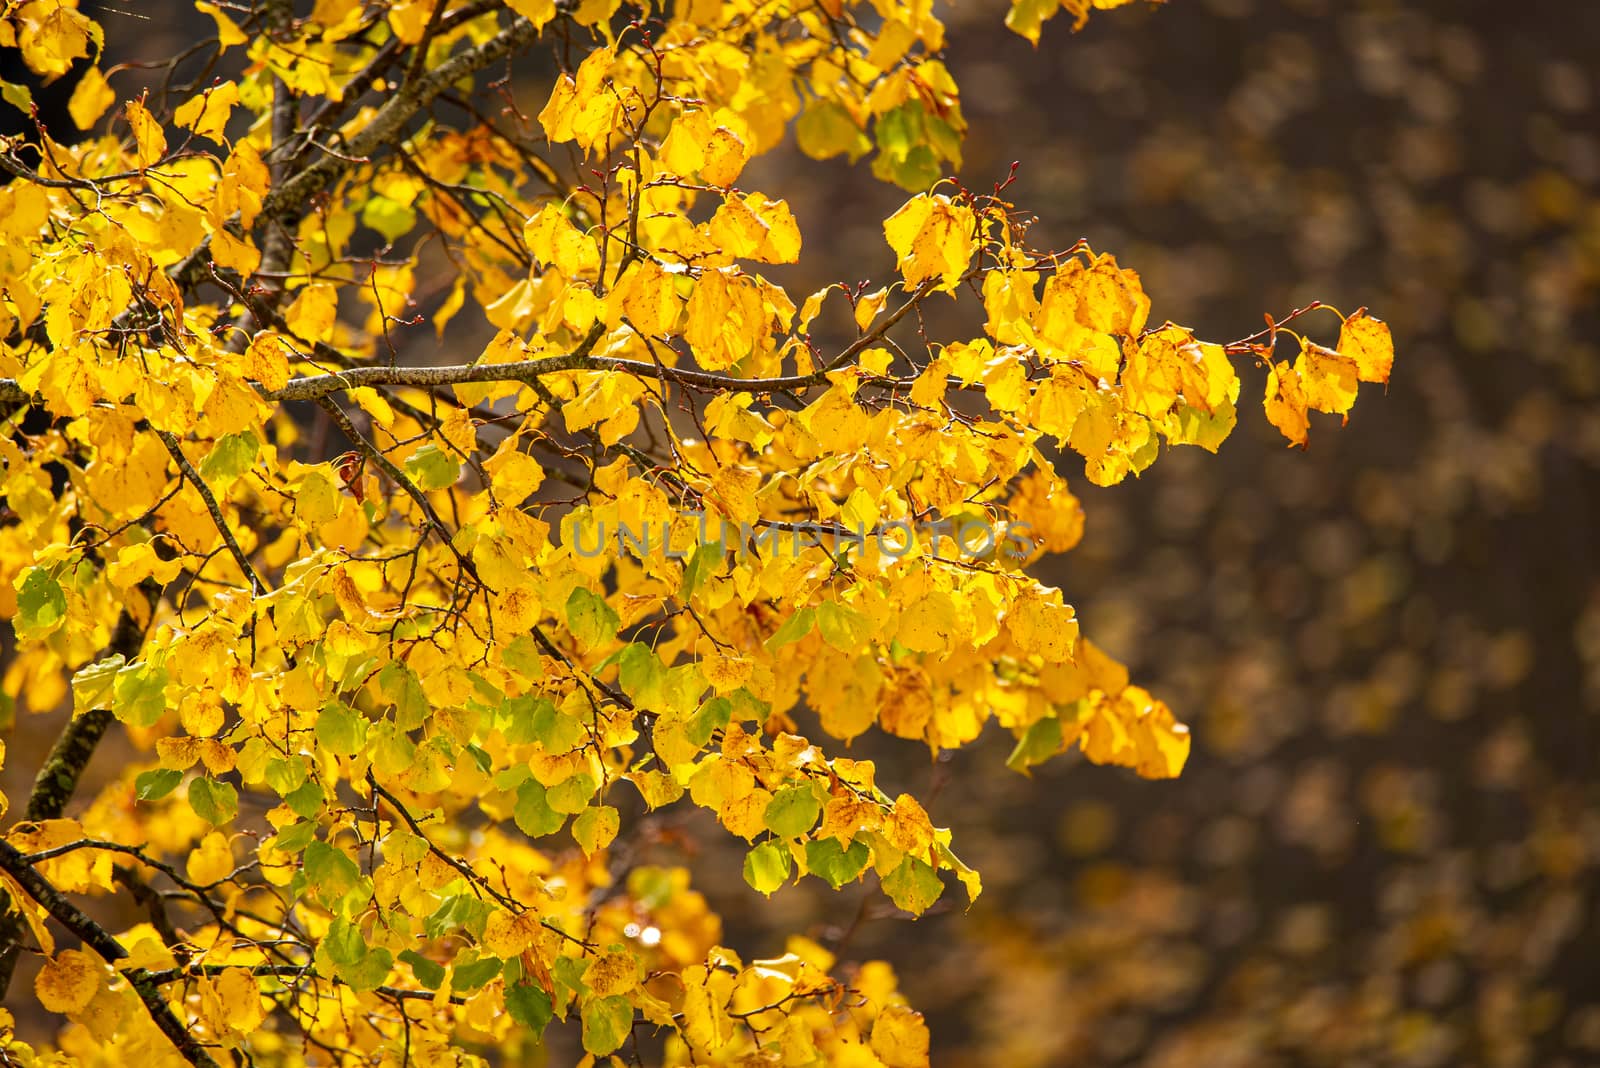 Close-up of tree branches with bright yellow autumn leaves.